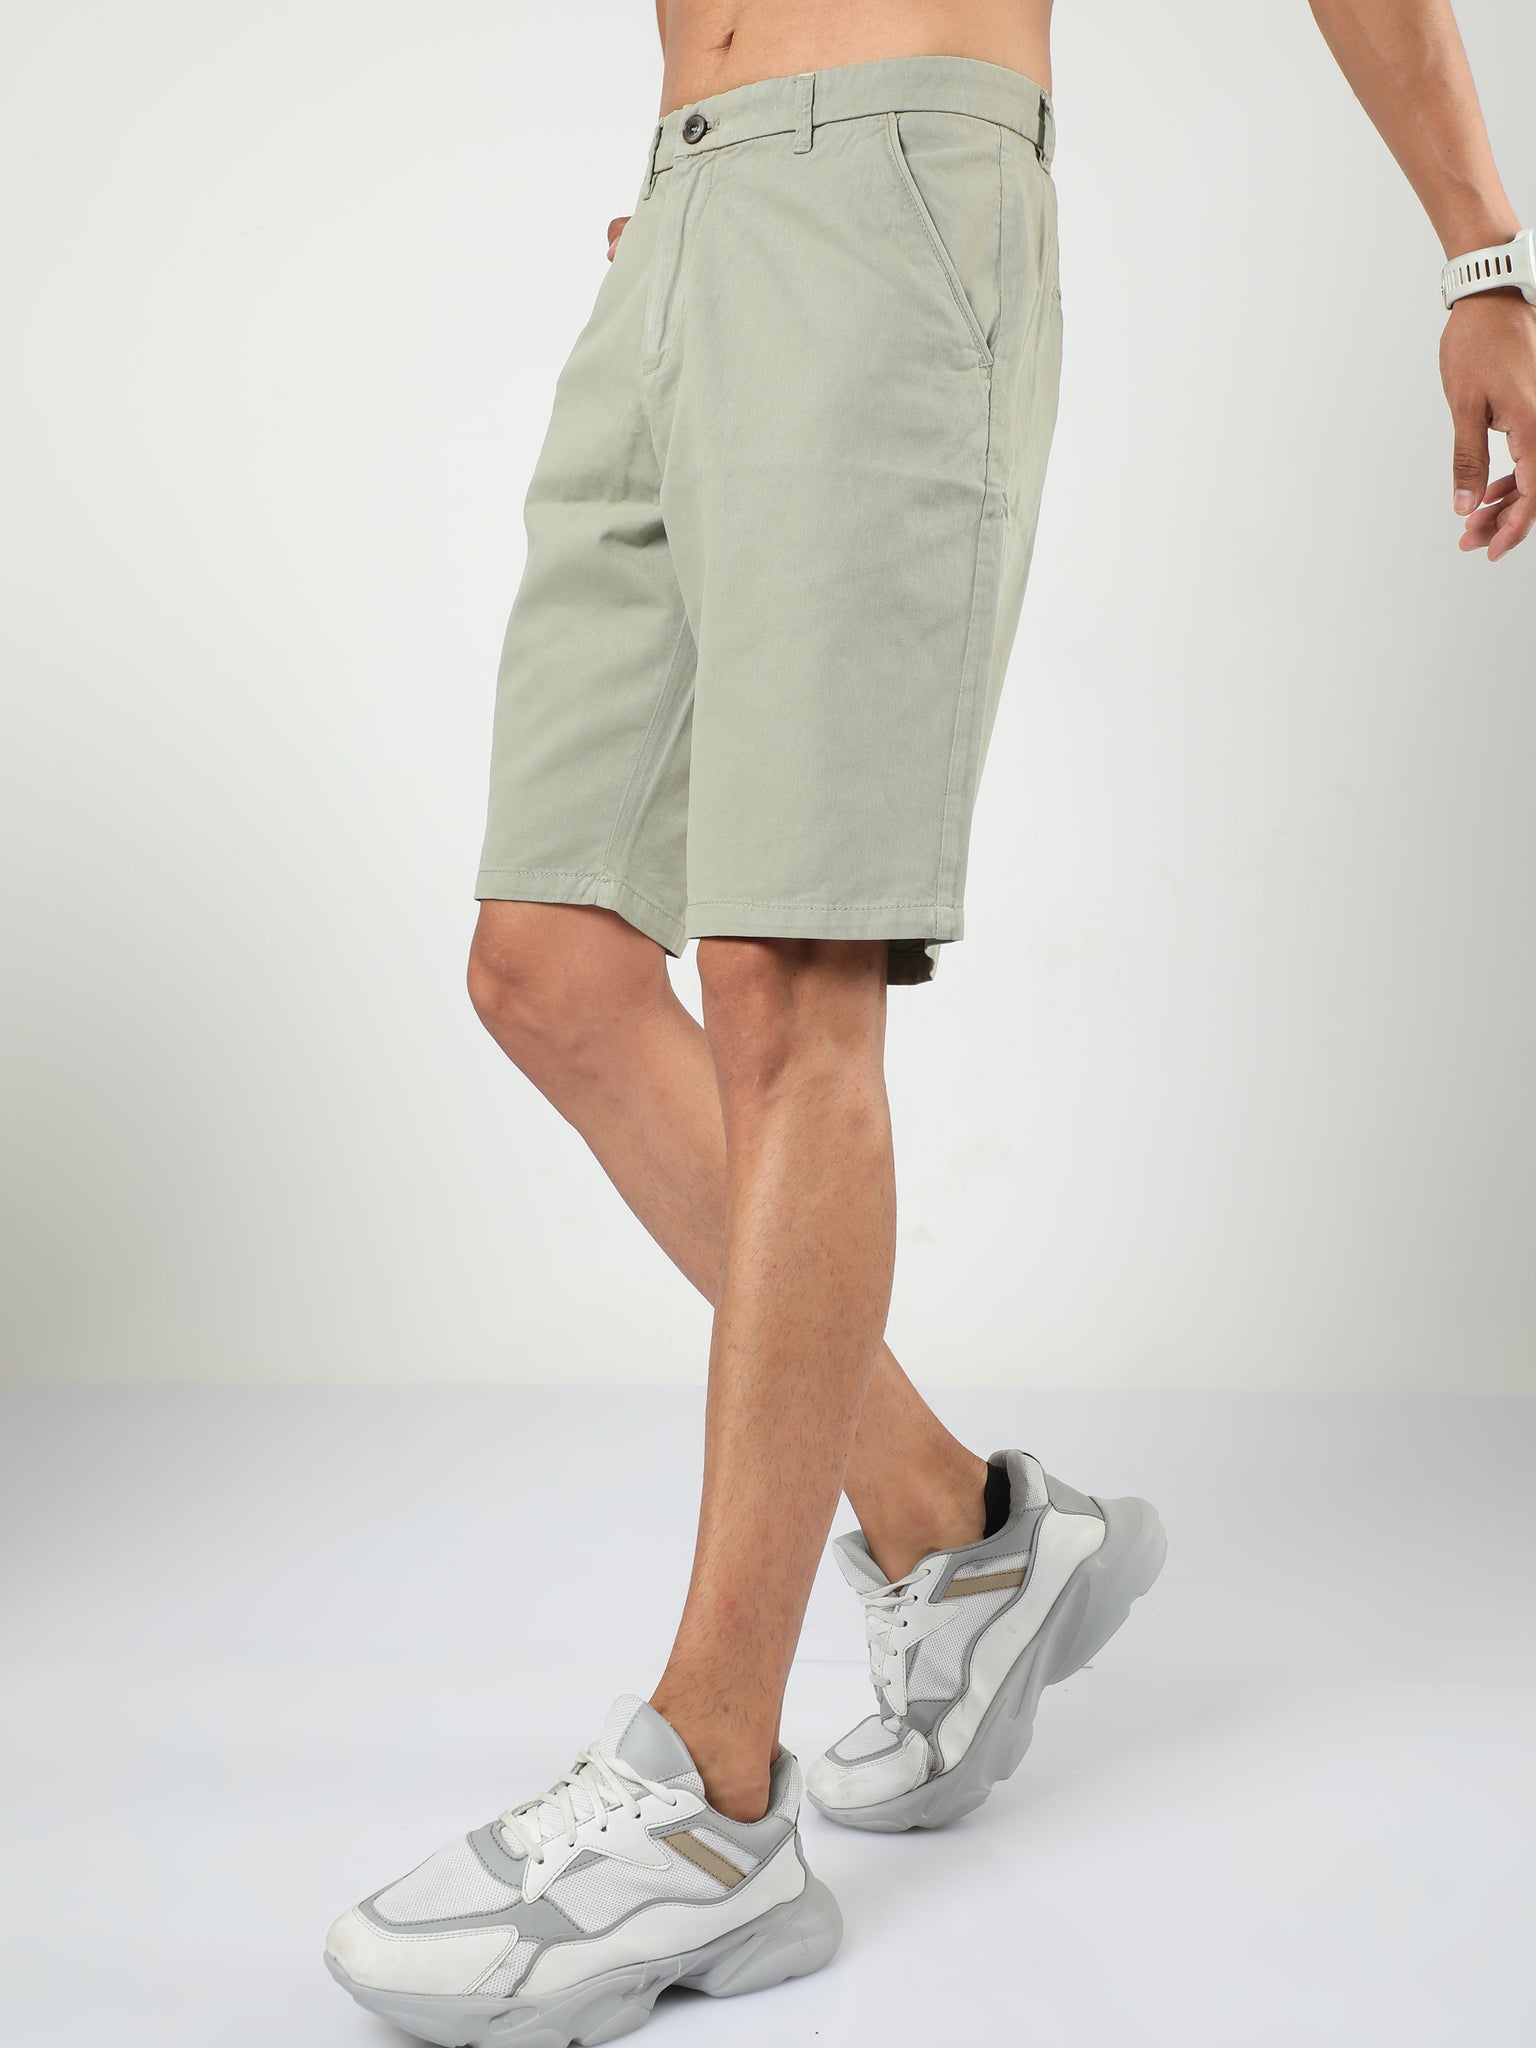 French Olive Shorts for Men